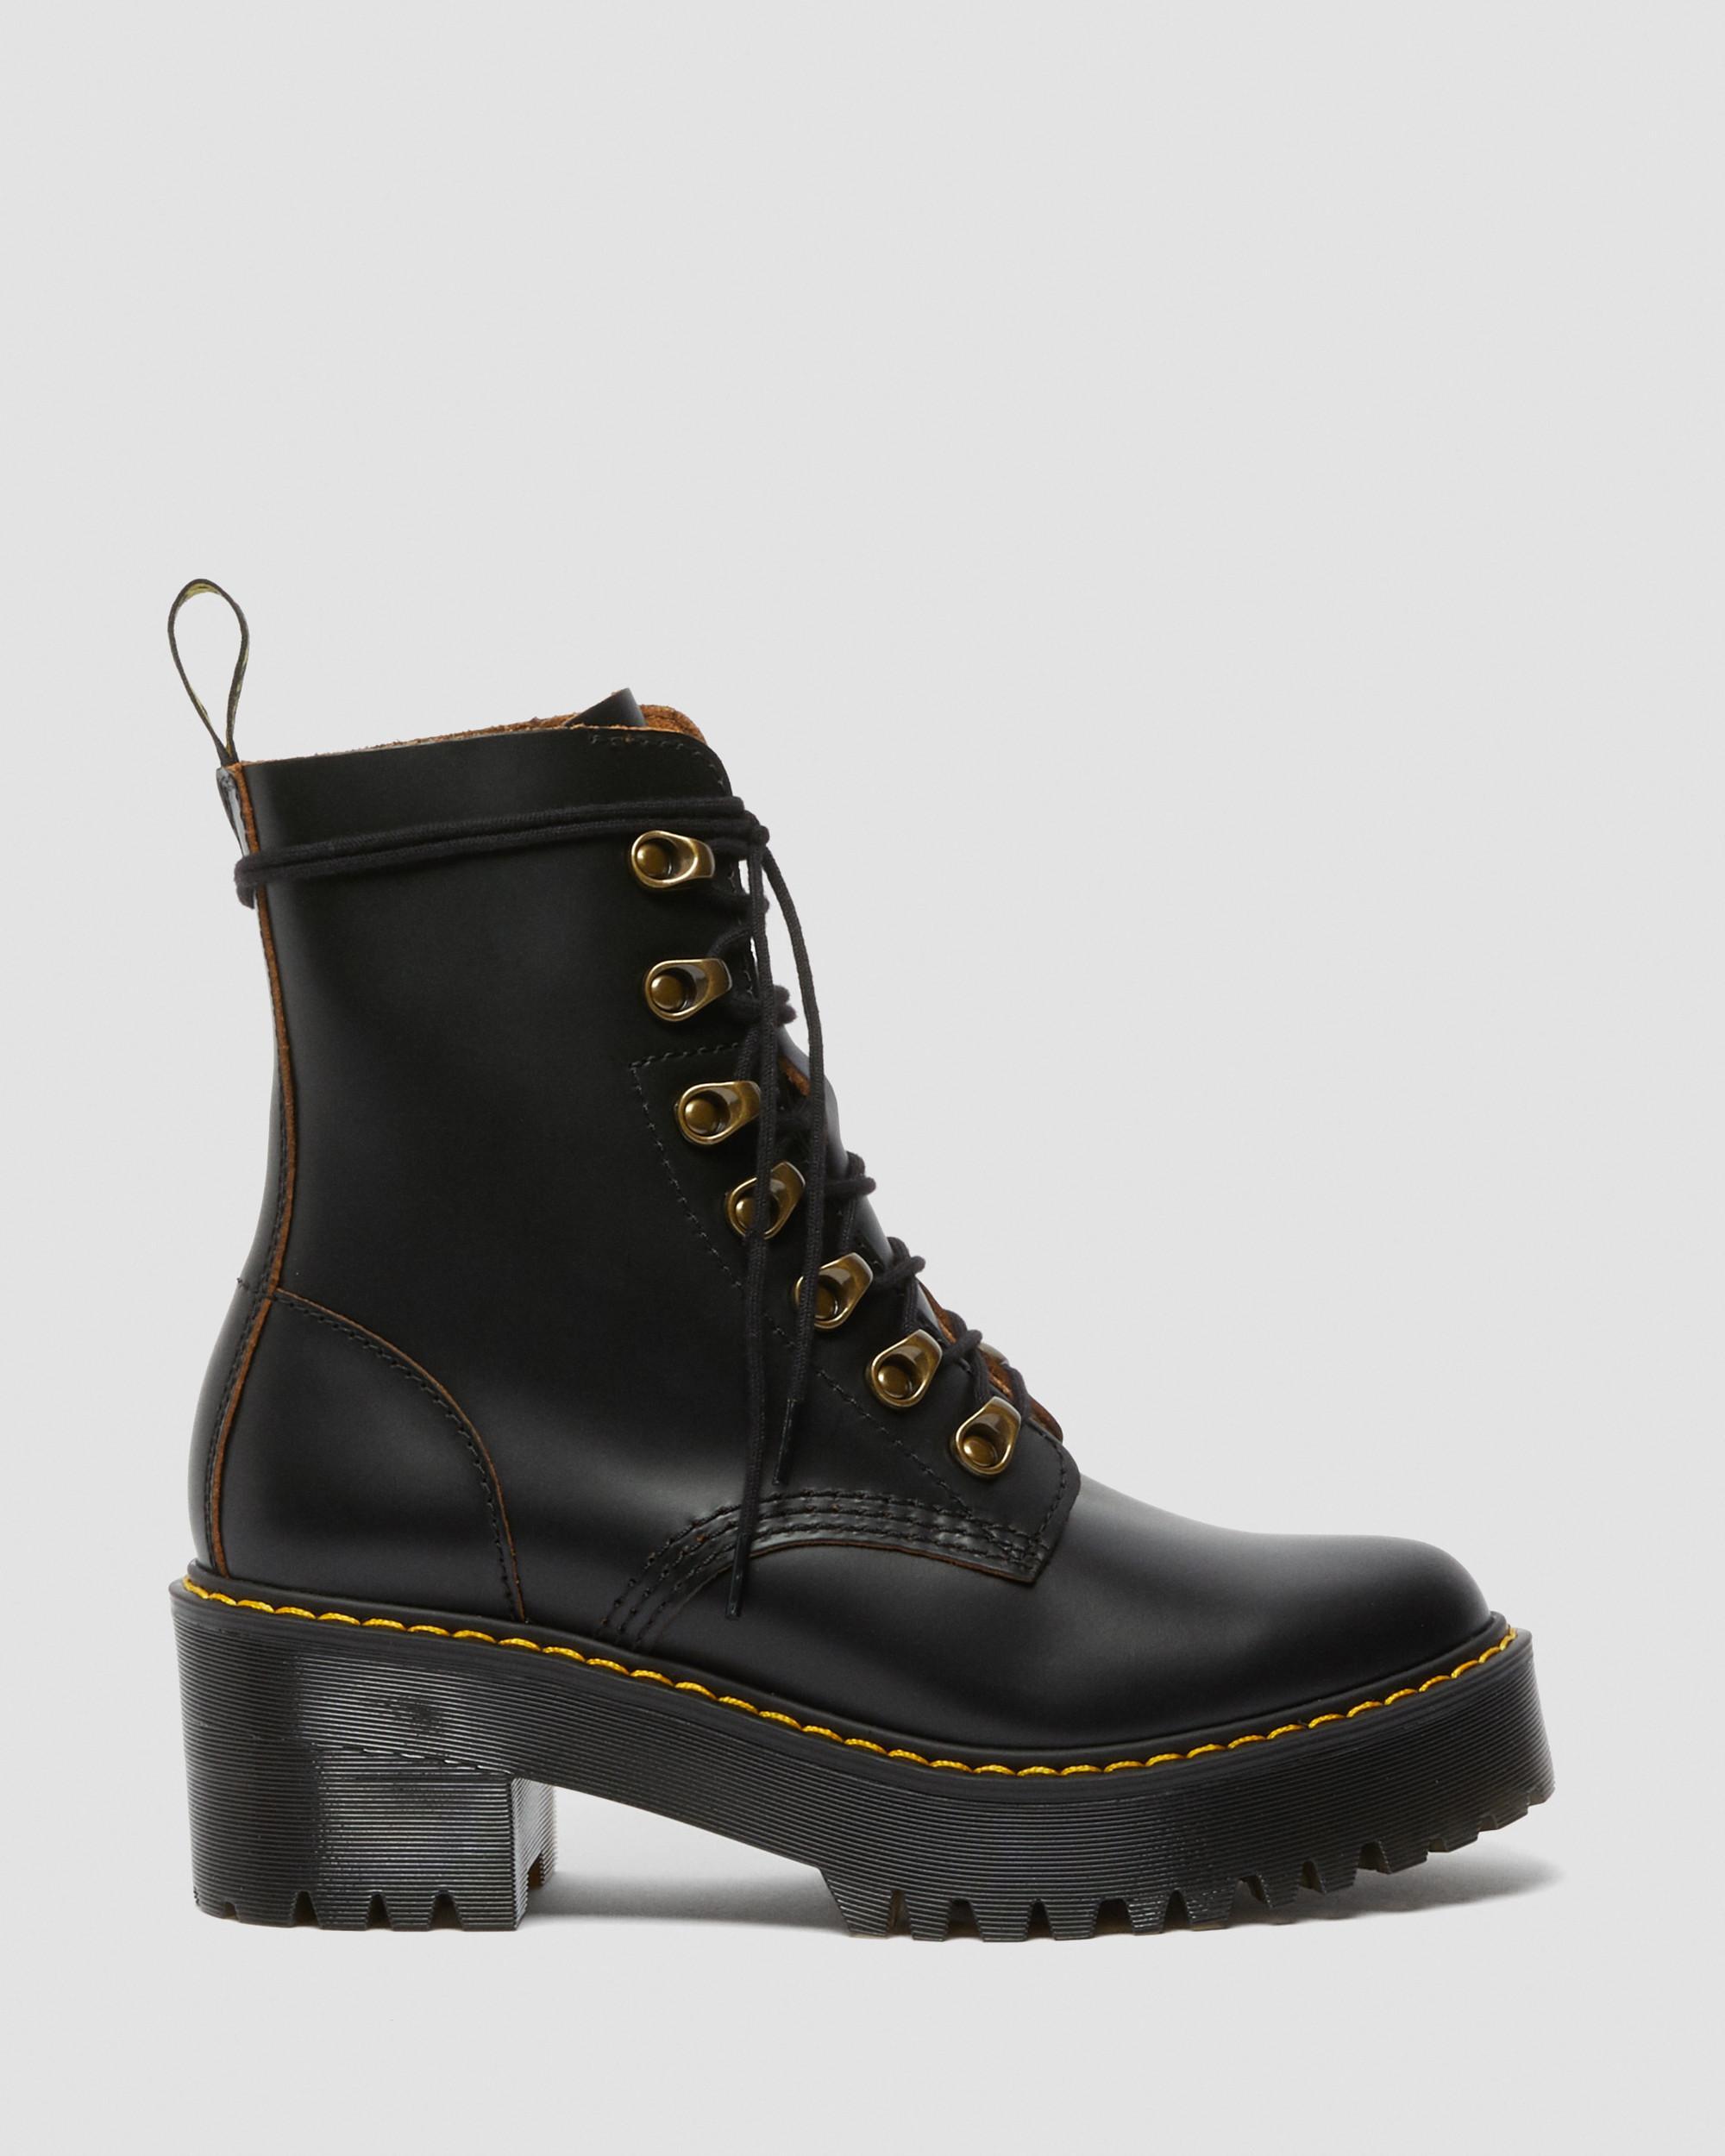 Dr. Martens Leona Women's Vintage Smooth Leather Heeled Boots in Black |  Lyst